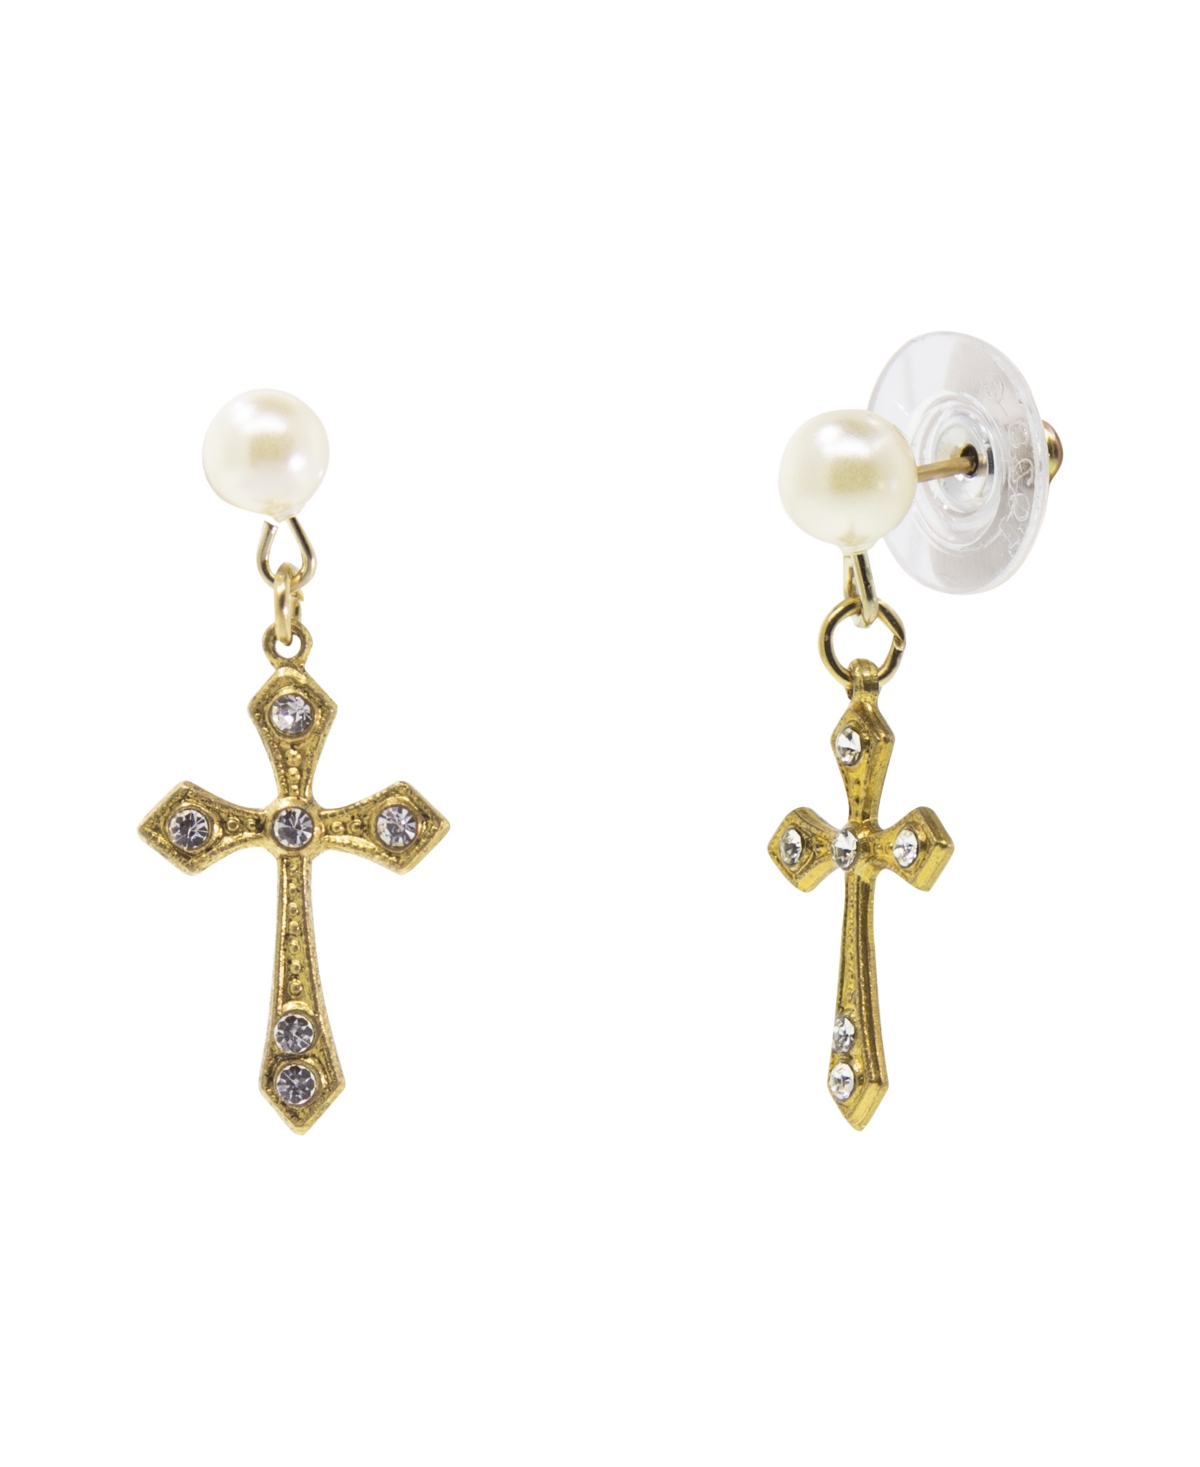 Gold-Tone Crystal Cross with Imitation Pearl Stud Drop Earrings - White